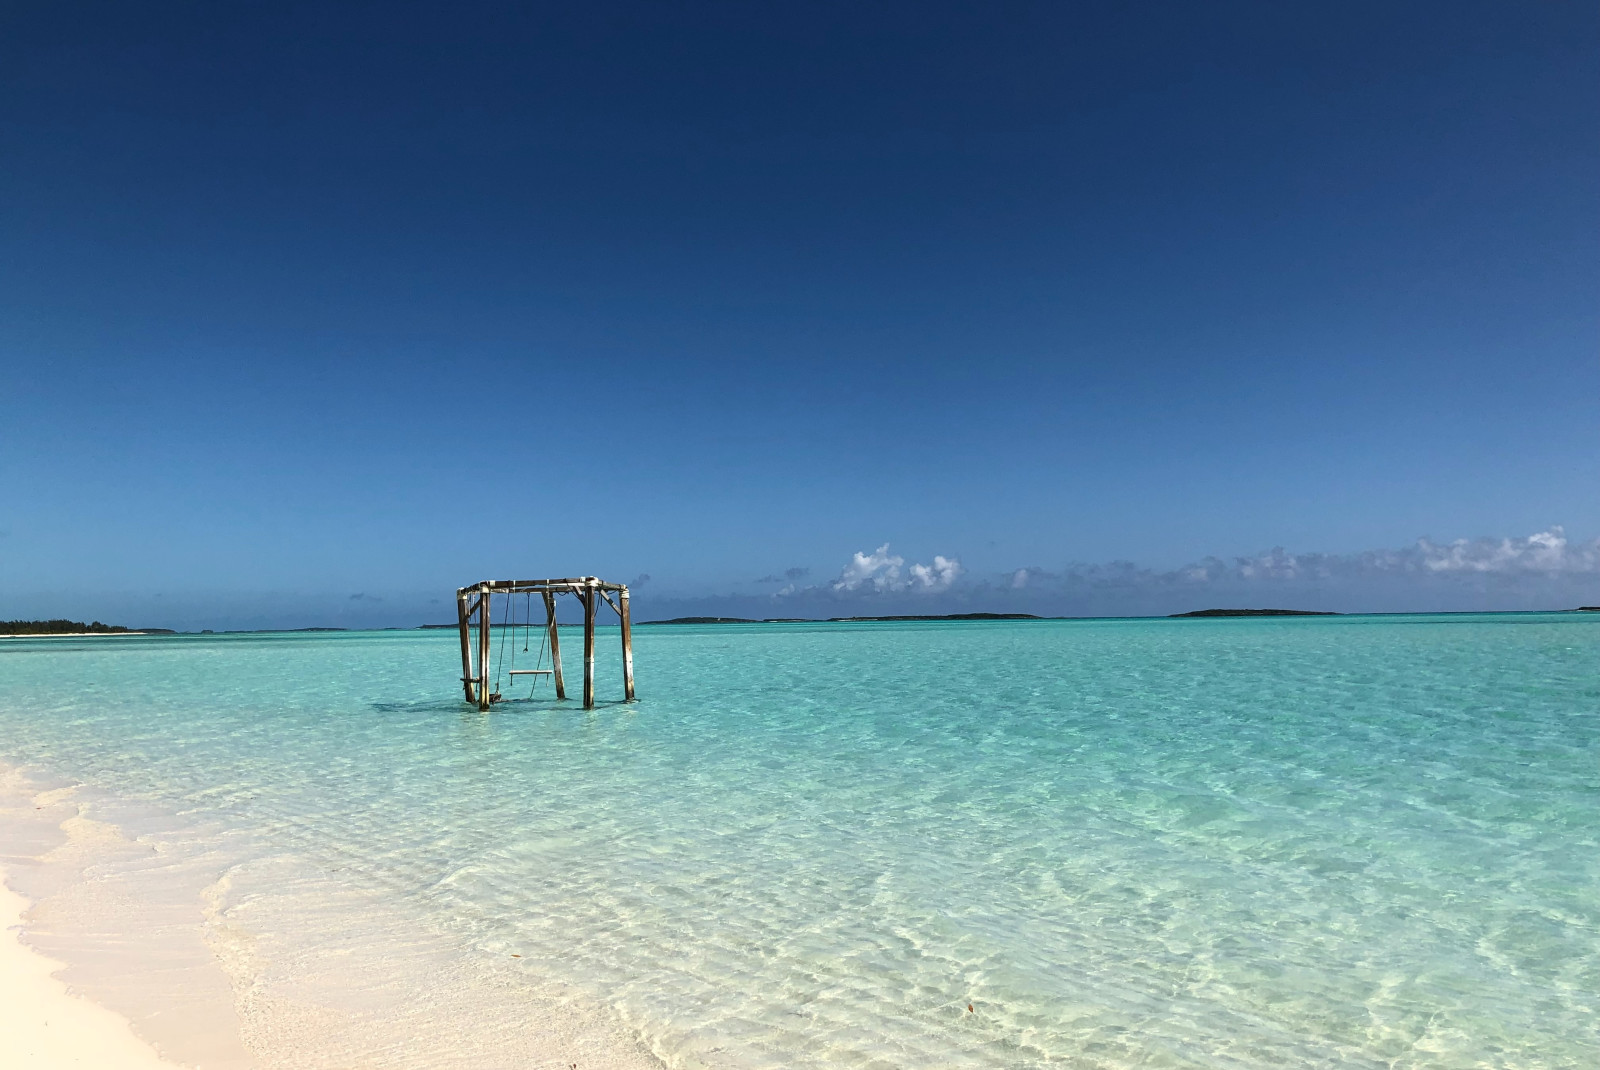 Swingset in the ocean with a blue sky in Exumas